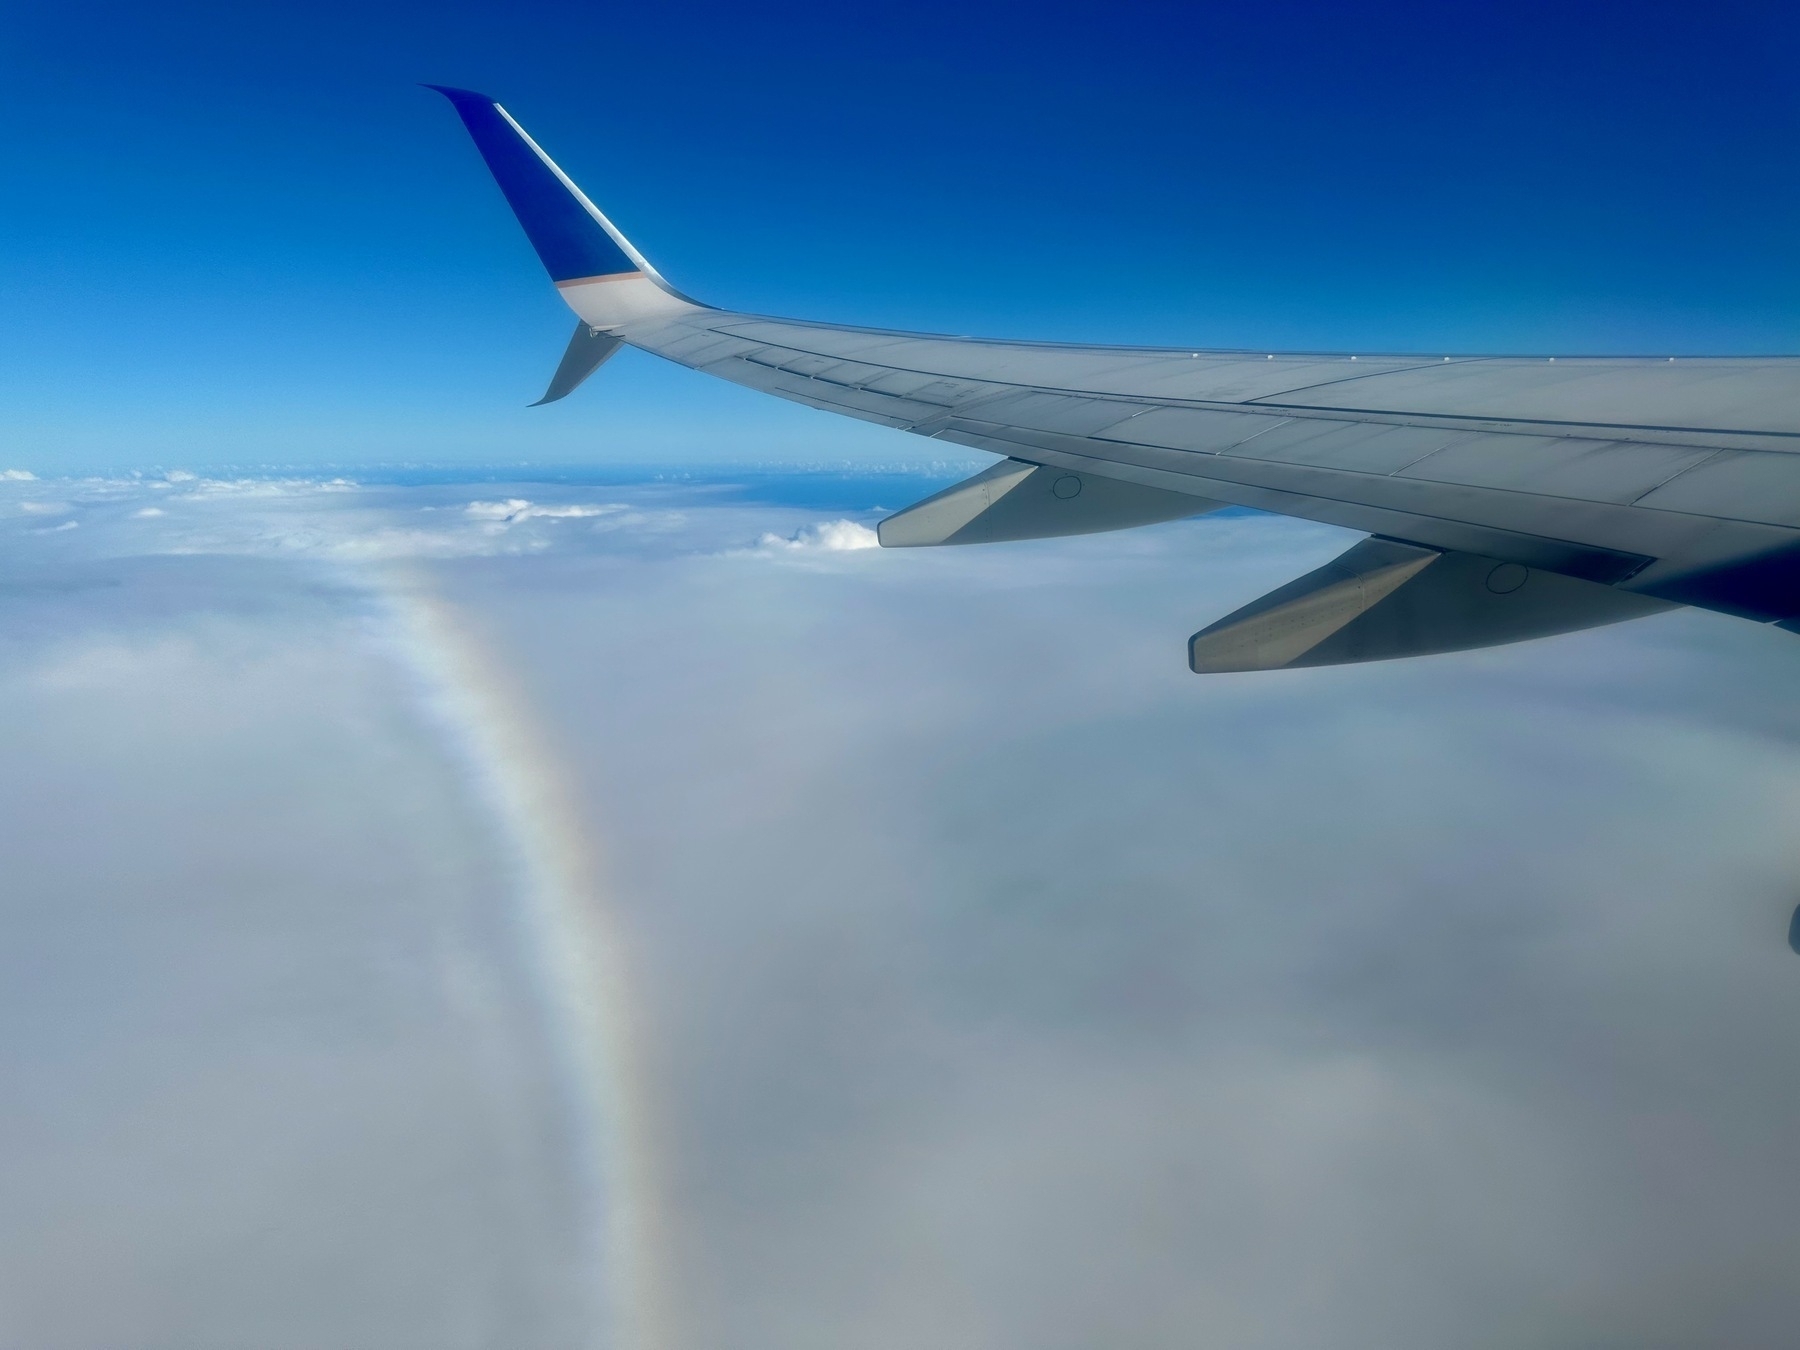 Photo from an airplane window showing the wing and a rainbow arched across the low white clouds.